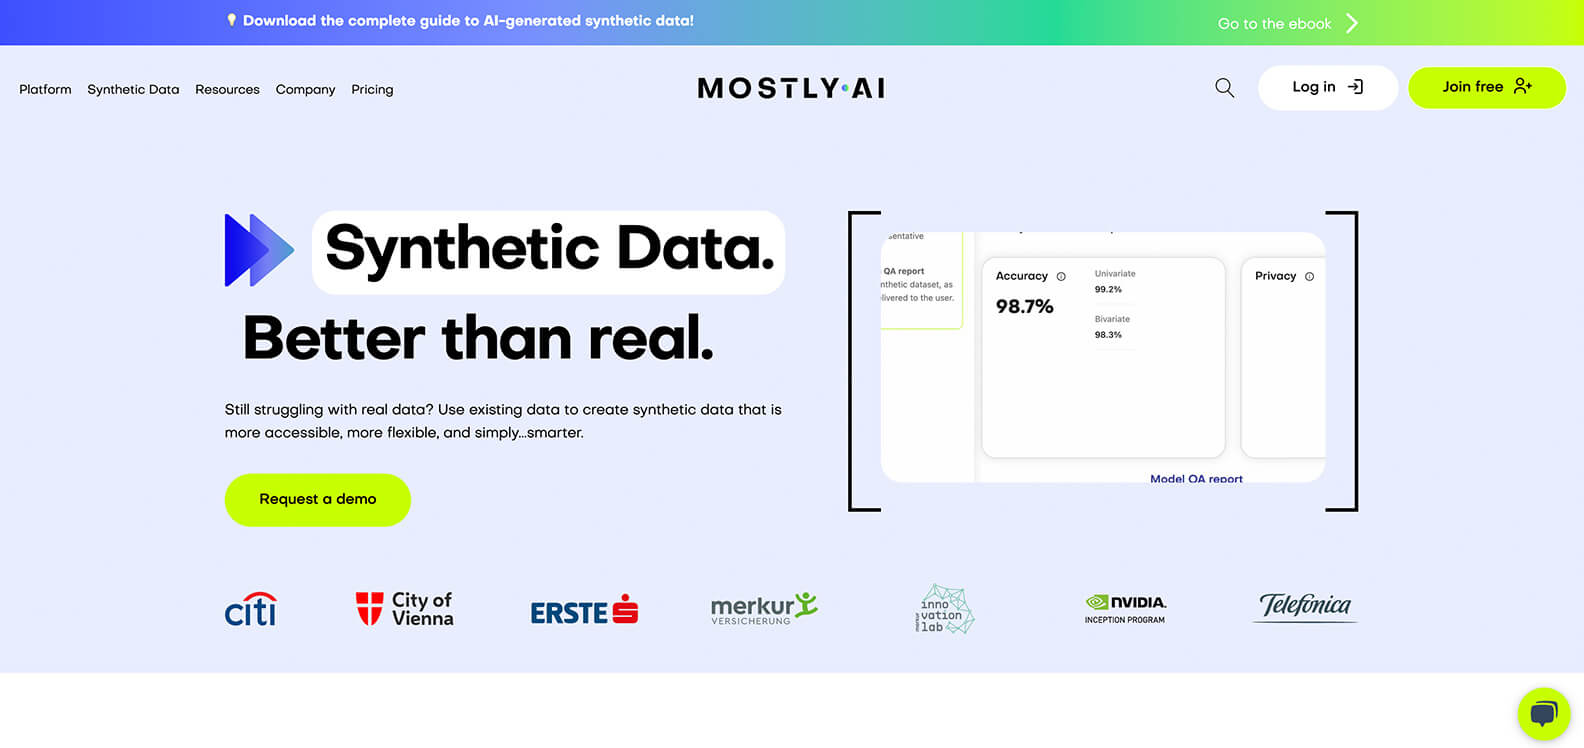 Post: Mostly AI